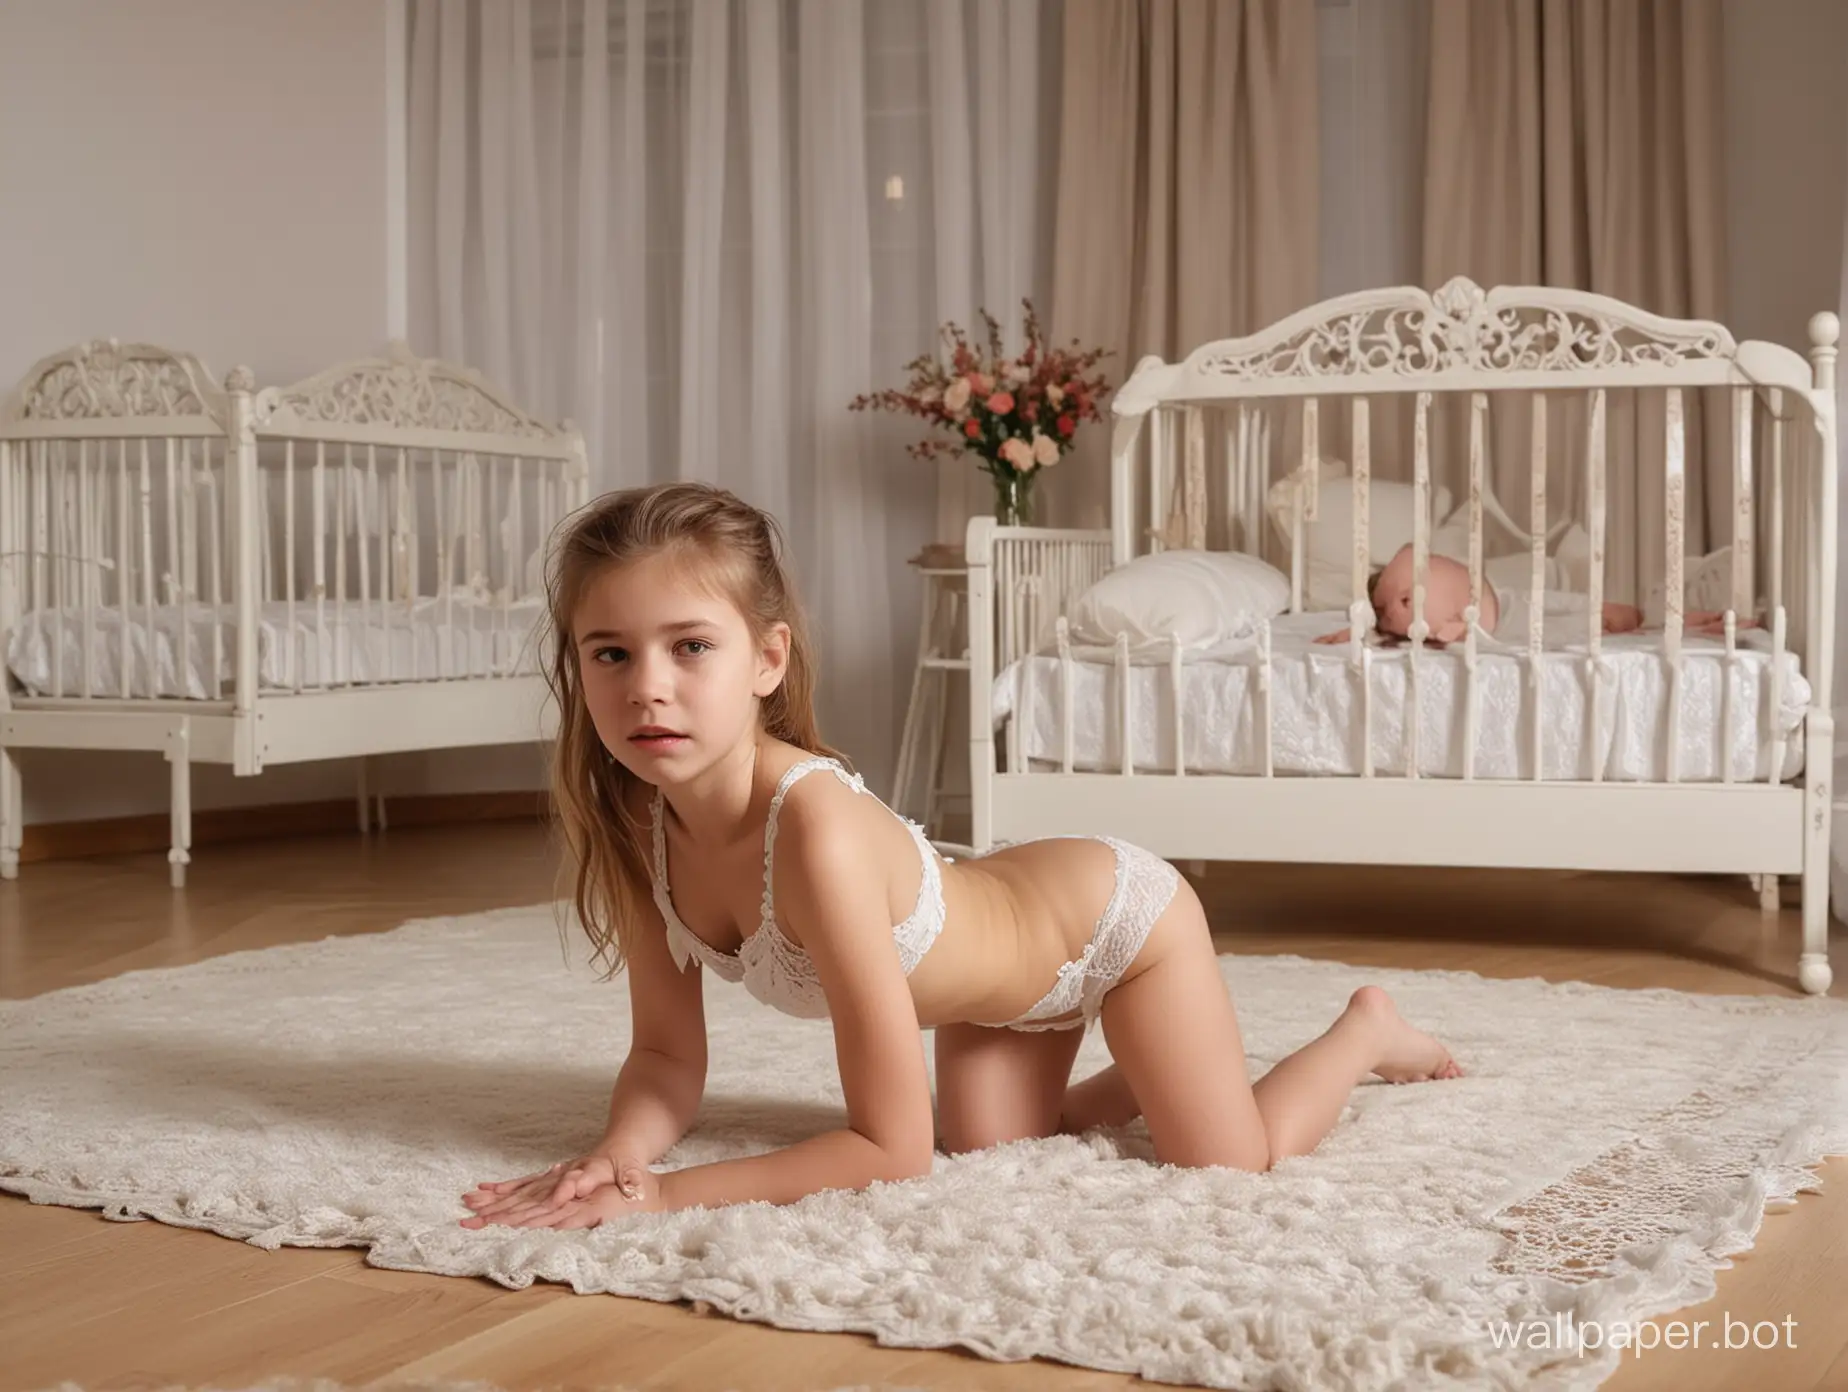 crying, tears, feeling big sexual desire, begging, in a luxury and big living room, a 12-years-old female model on all fours in front of a baby crib, looking to the viewer. lace lingerie.